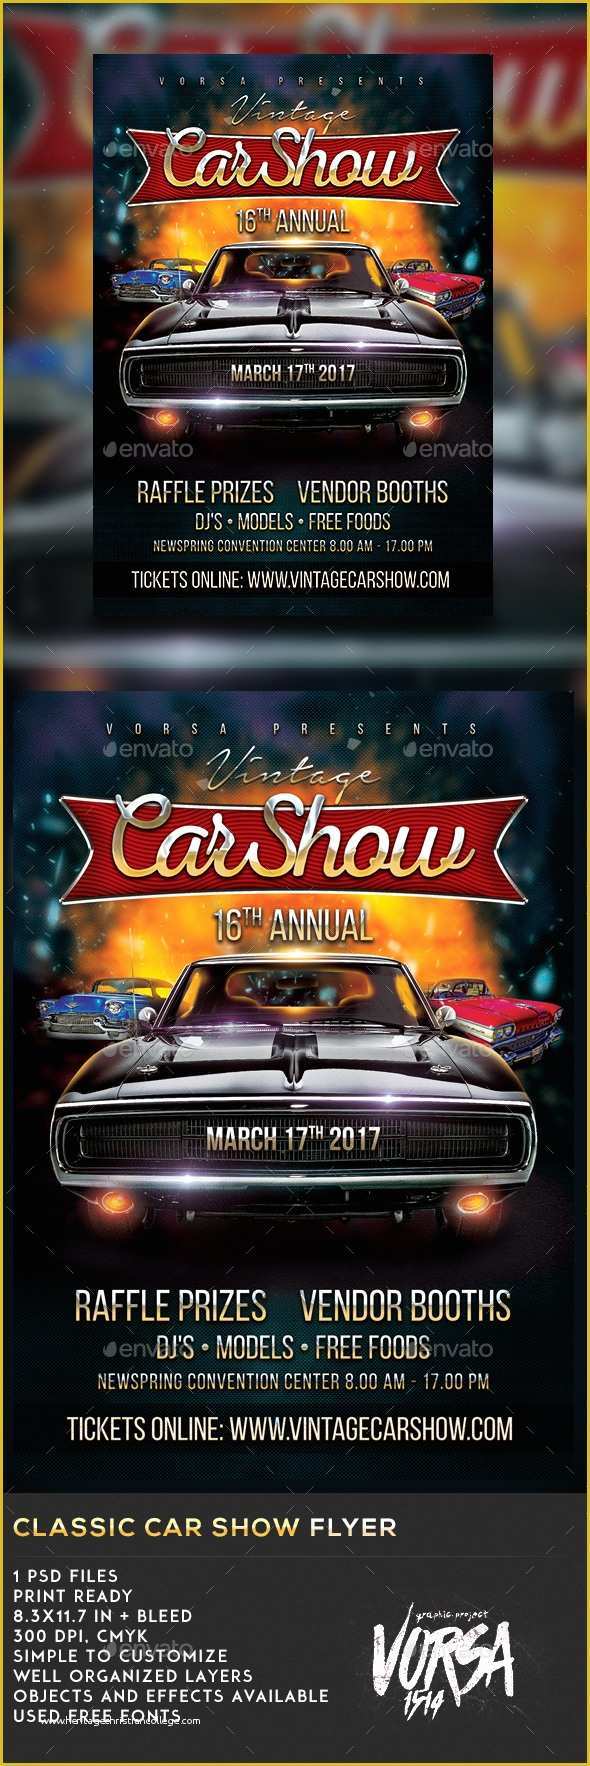 Free Car Show Flyer Template Of Classic Car Show Flyer by Vorsa